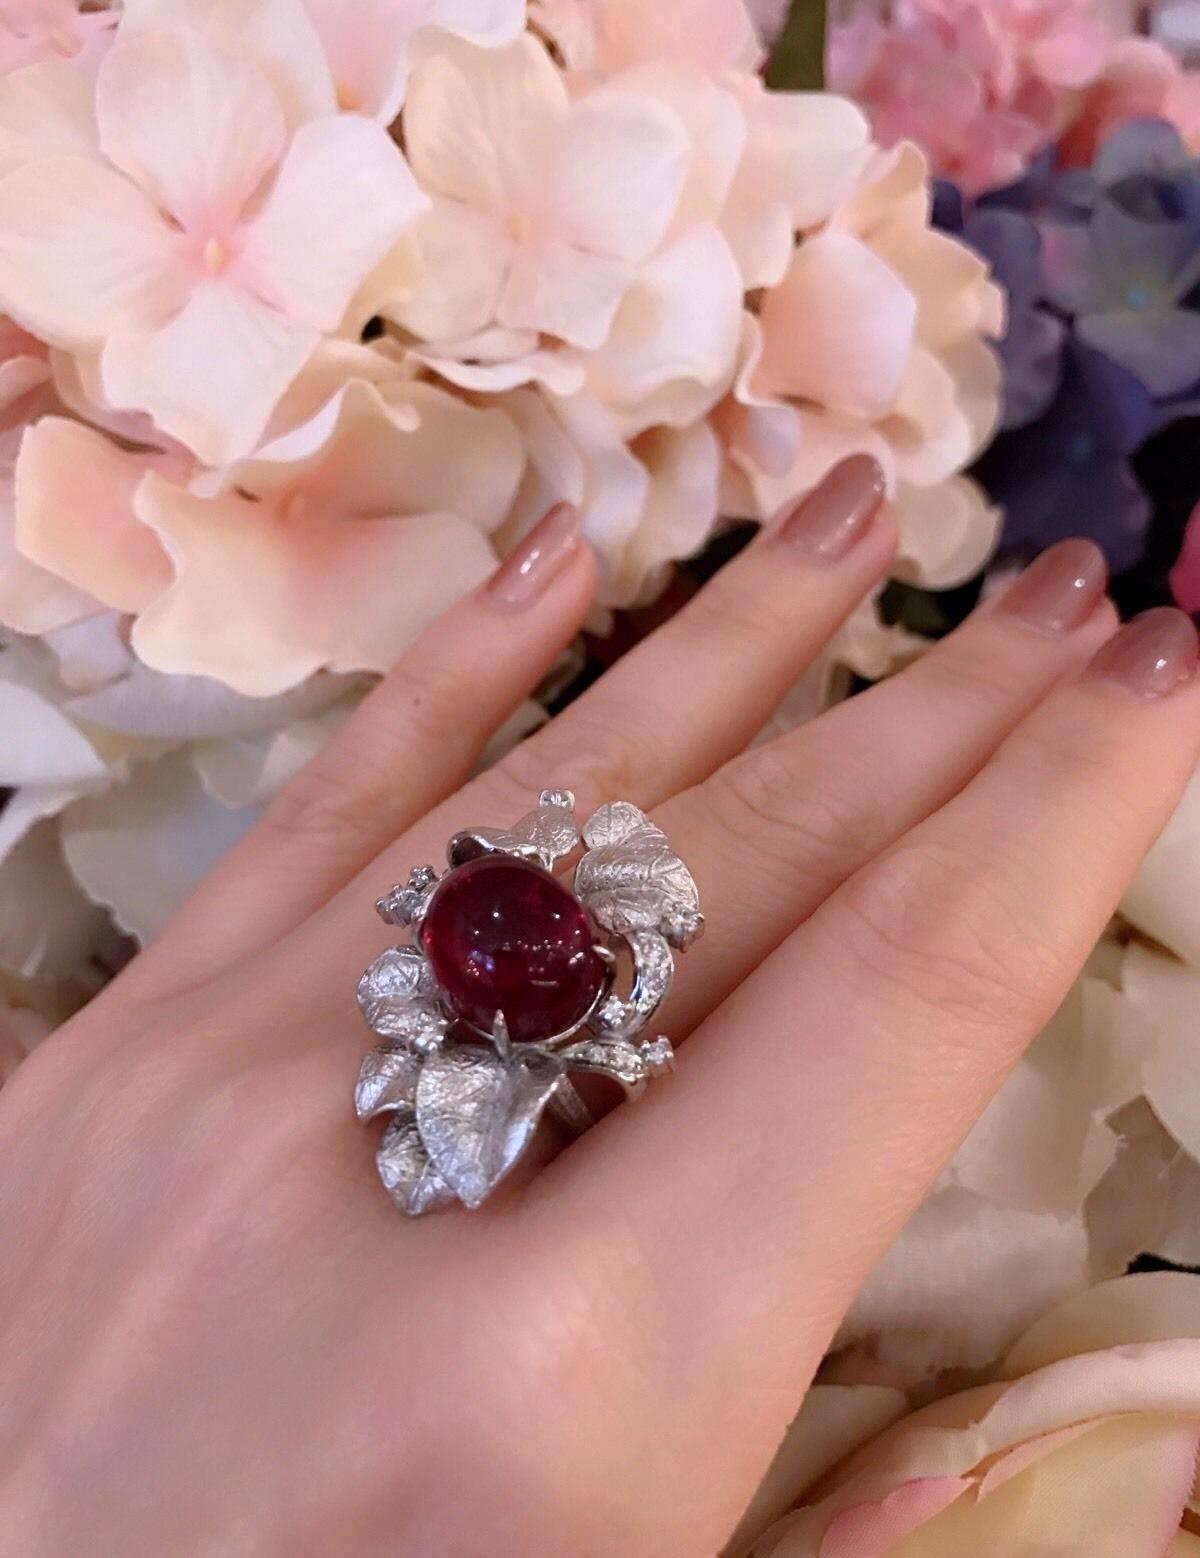 Beautifully detailed Pink Tourmaline and Diamond Ring in Platinum. Center Pink Tourmaline is Cabochon Oval weighing 10.01 carats, set horizontally, surrounded by textured Platinum leaves and a scattering of round brilliant diamonds totaling .25